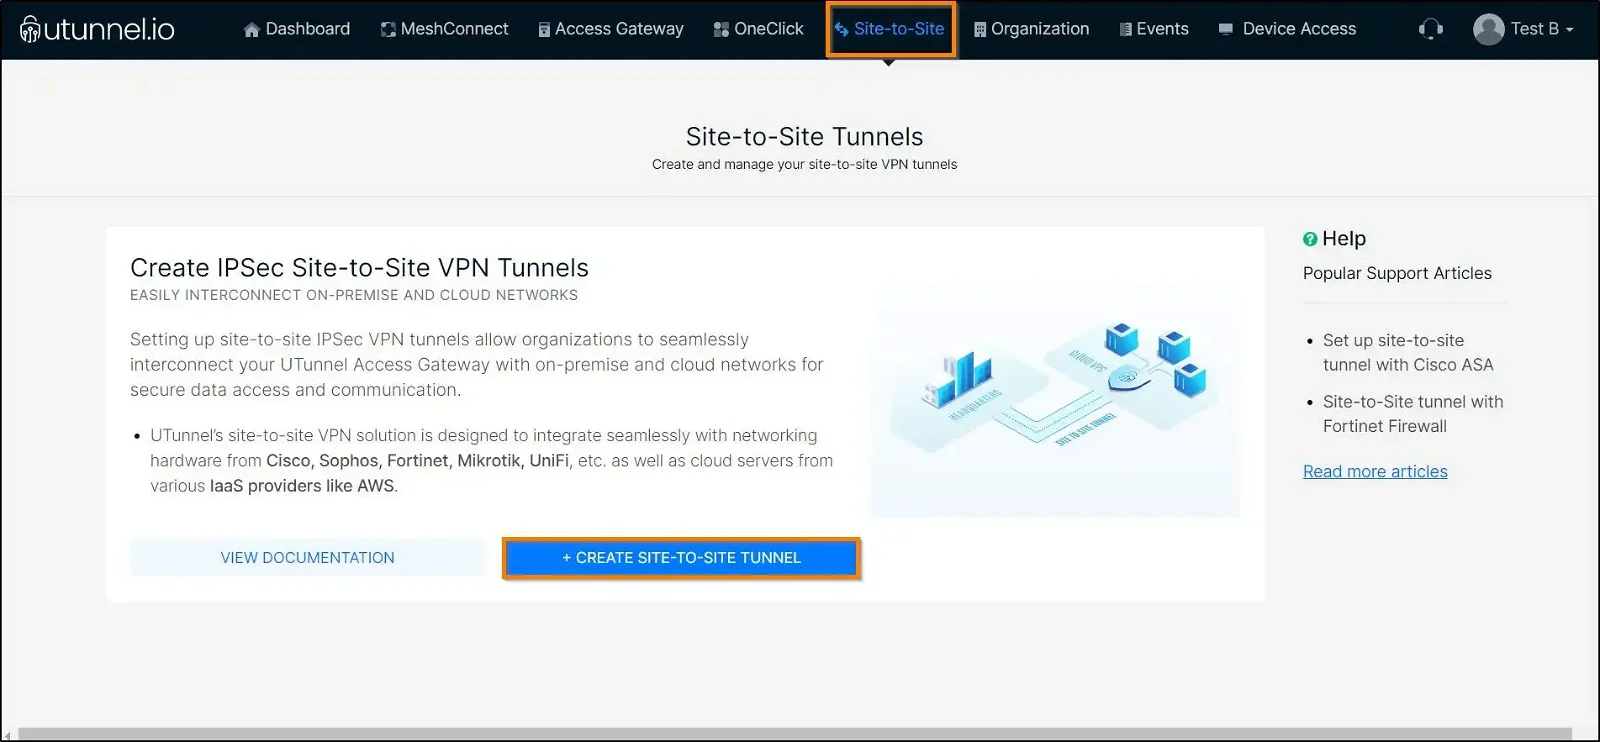 setup site-to-site tunnel with Sophos XG firewall site-to-site tab